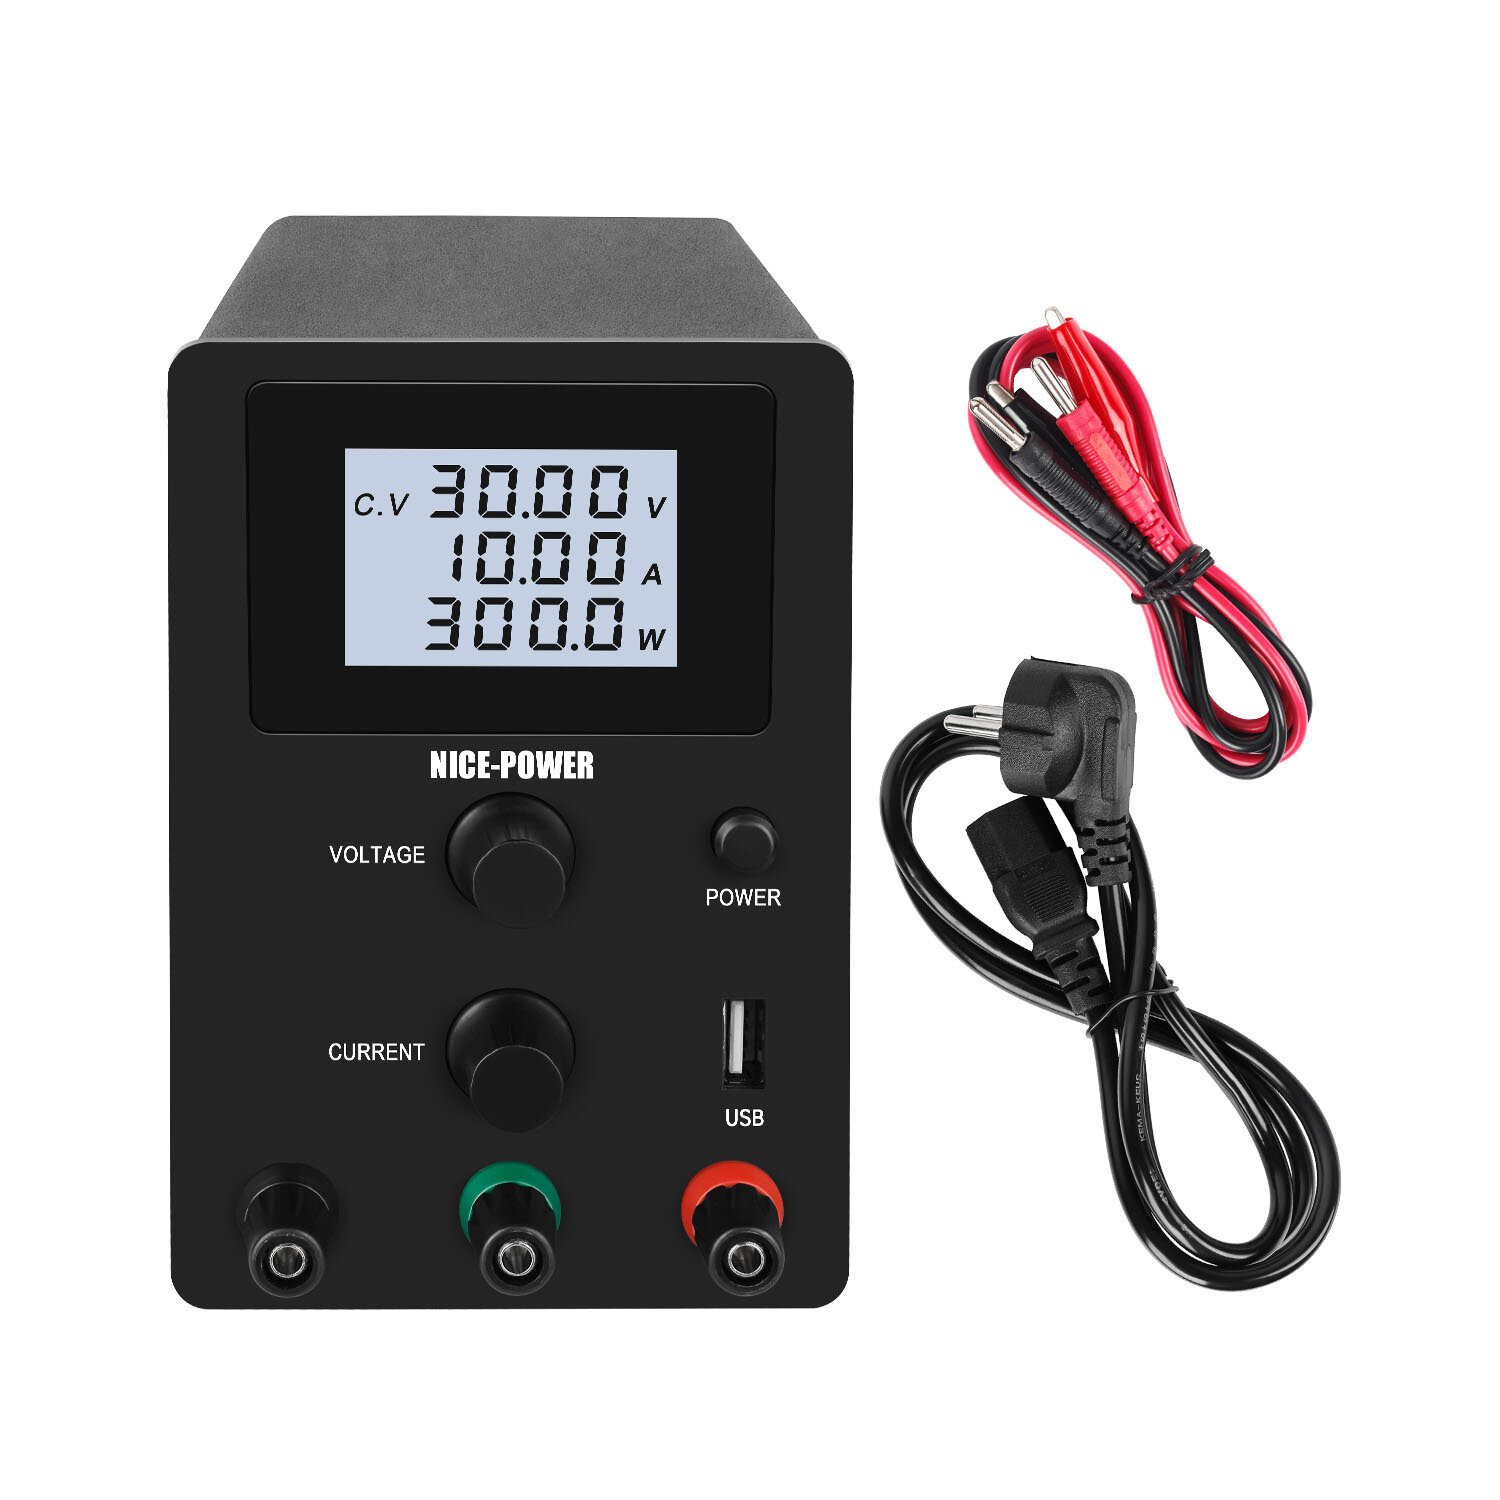 NICE-POWER R-SPS-D 3010D Power Supply 0-30V 0-10A Four-Digit Display USB 5V2A LCD Screen Low Ripple Compact Design